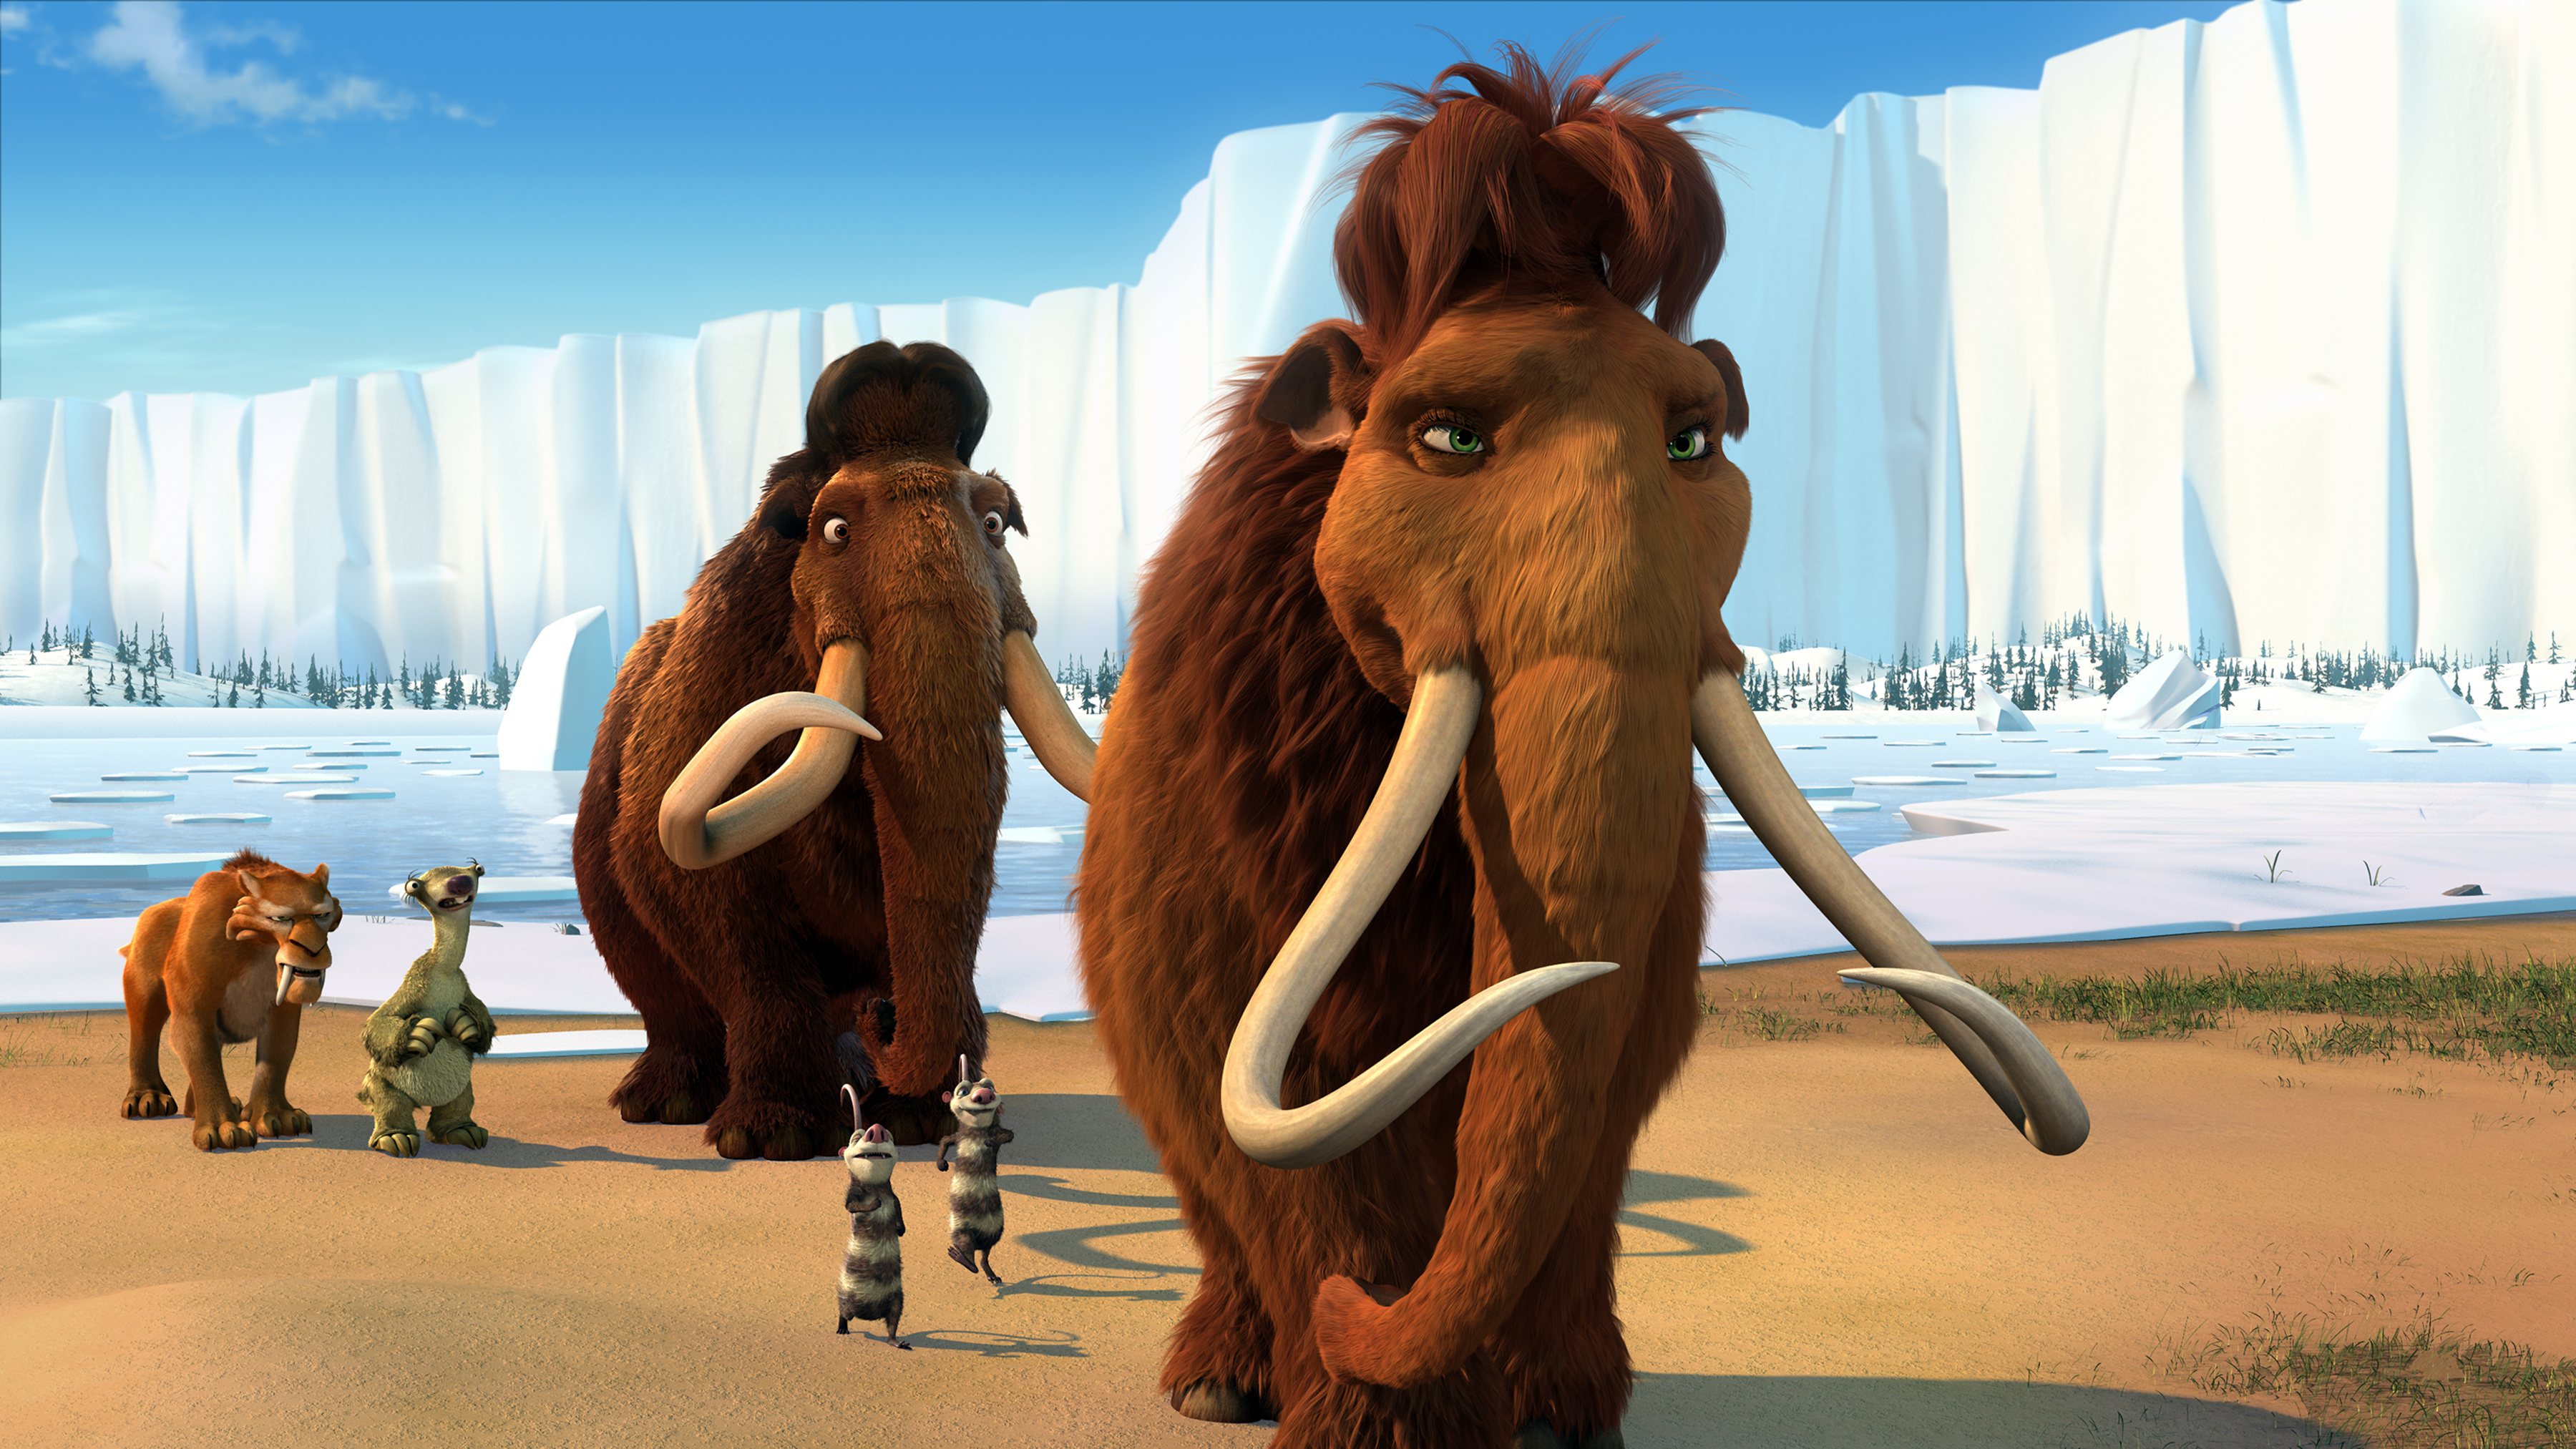 Ice Age: The Meltdown HD wallpapers, Desktop wallpaper - most viewed